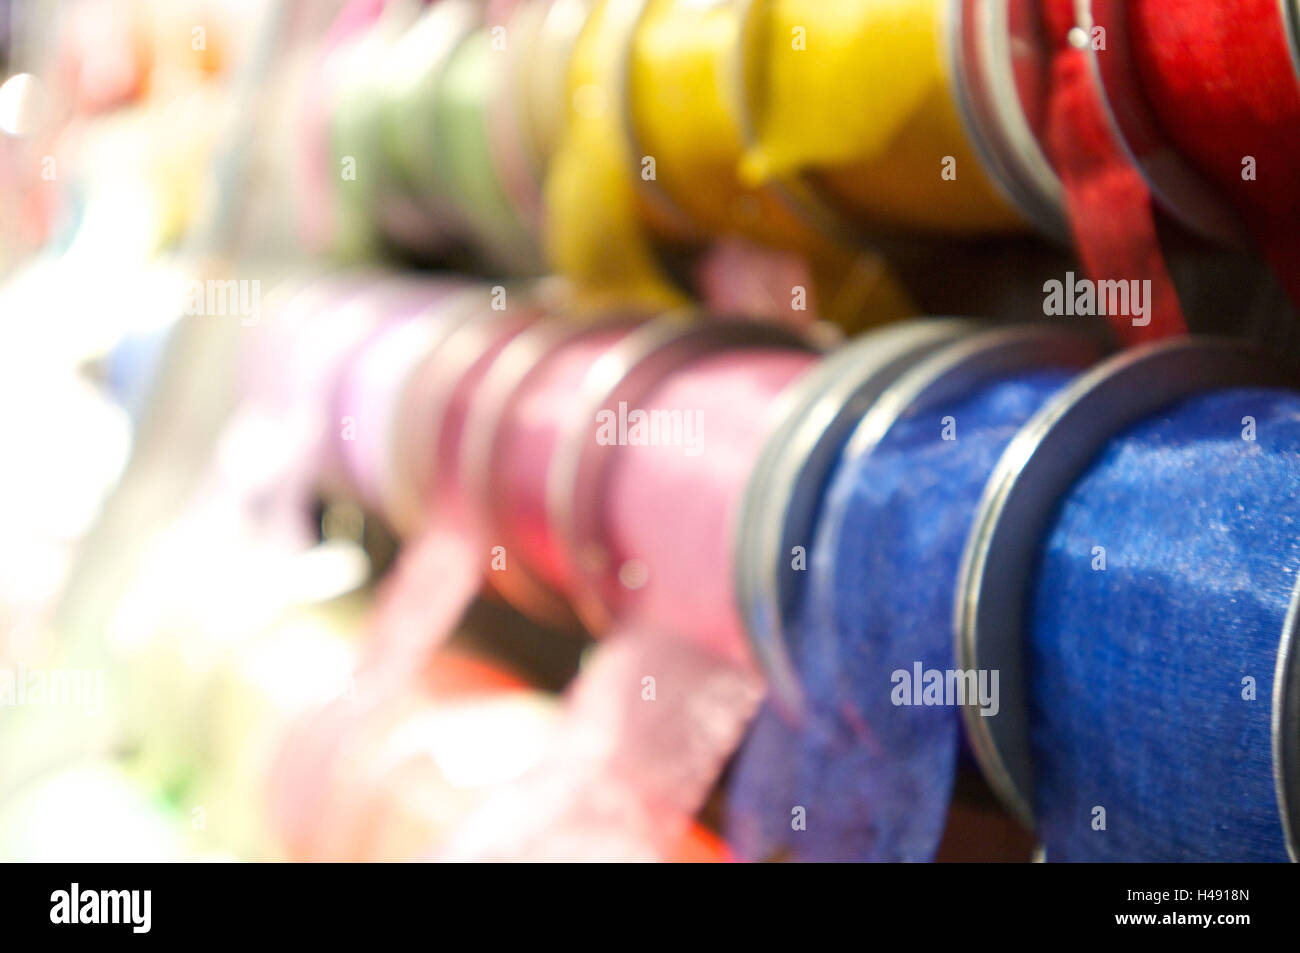 Ribbons and bows on spools, Stock Photo